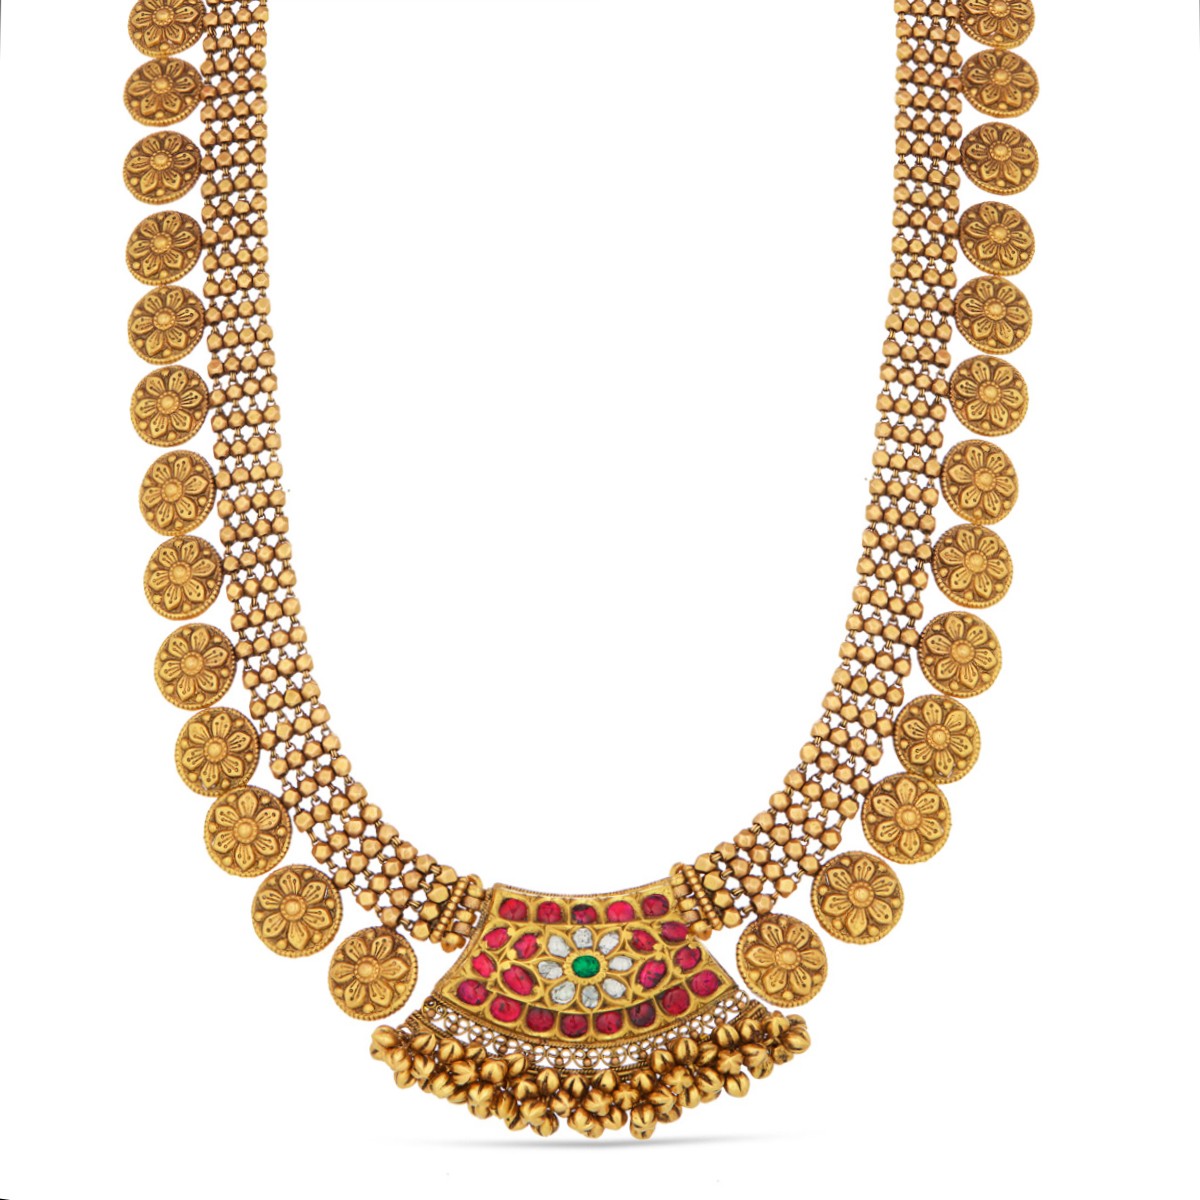 Sunny Harmony Necklace - Long Necklaces - Gold